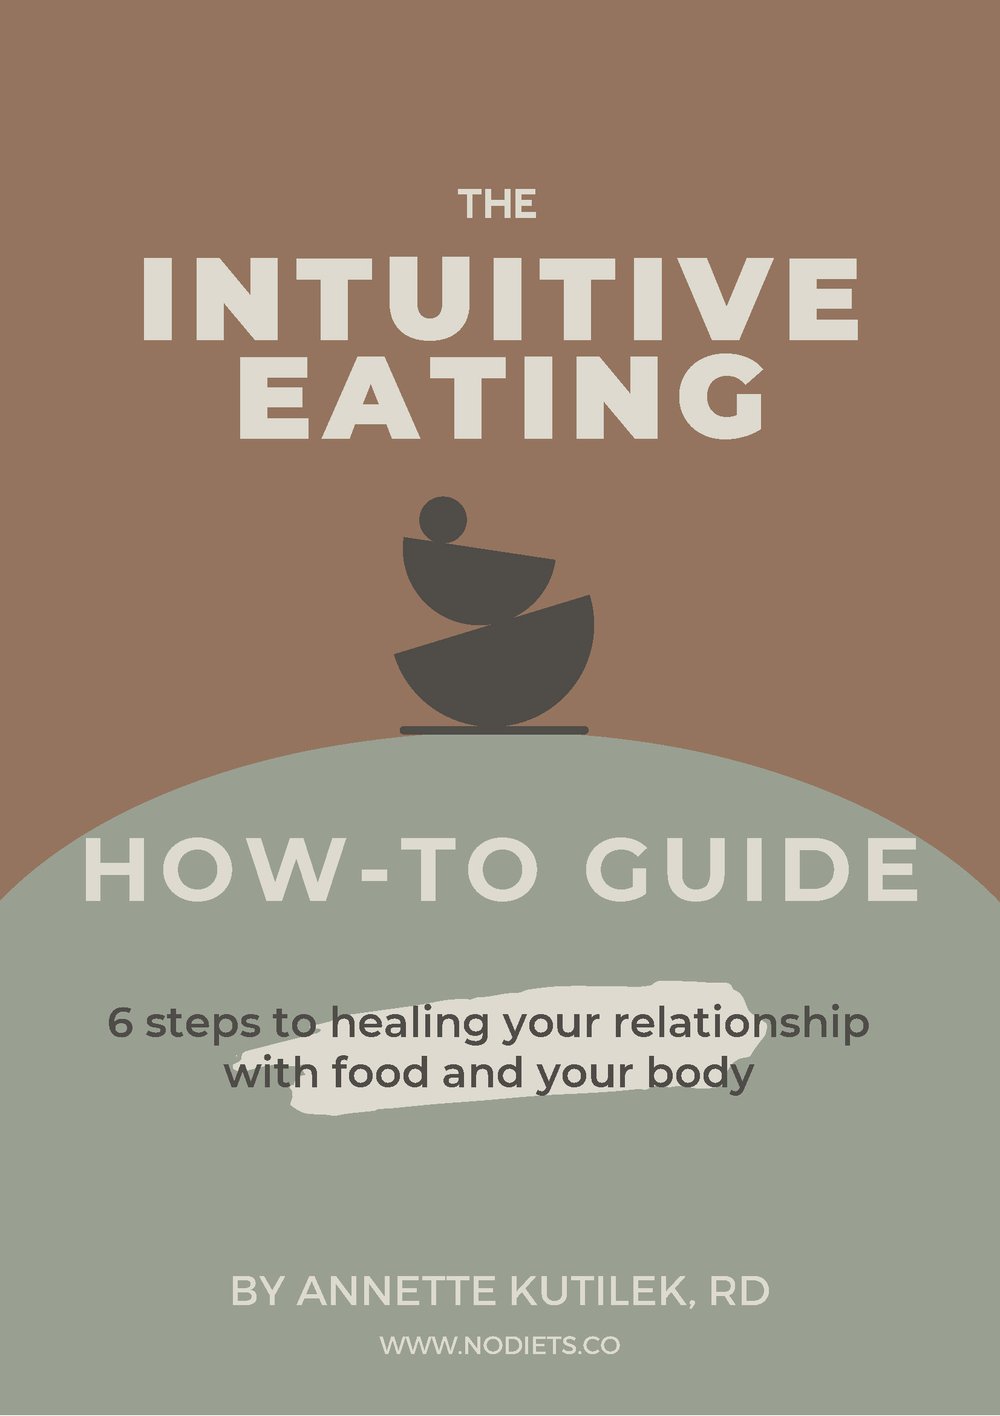 The Intuitive Eating How-To Guide (ebook)